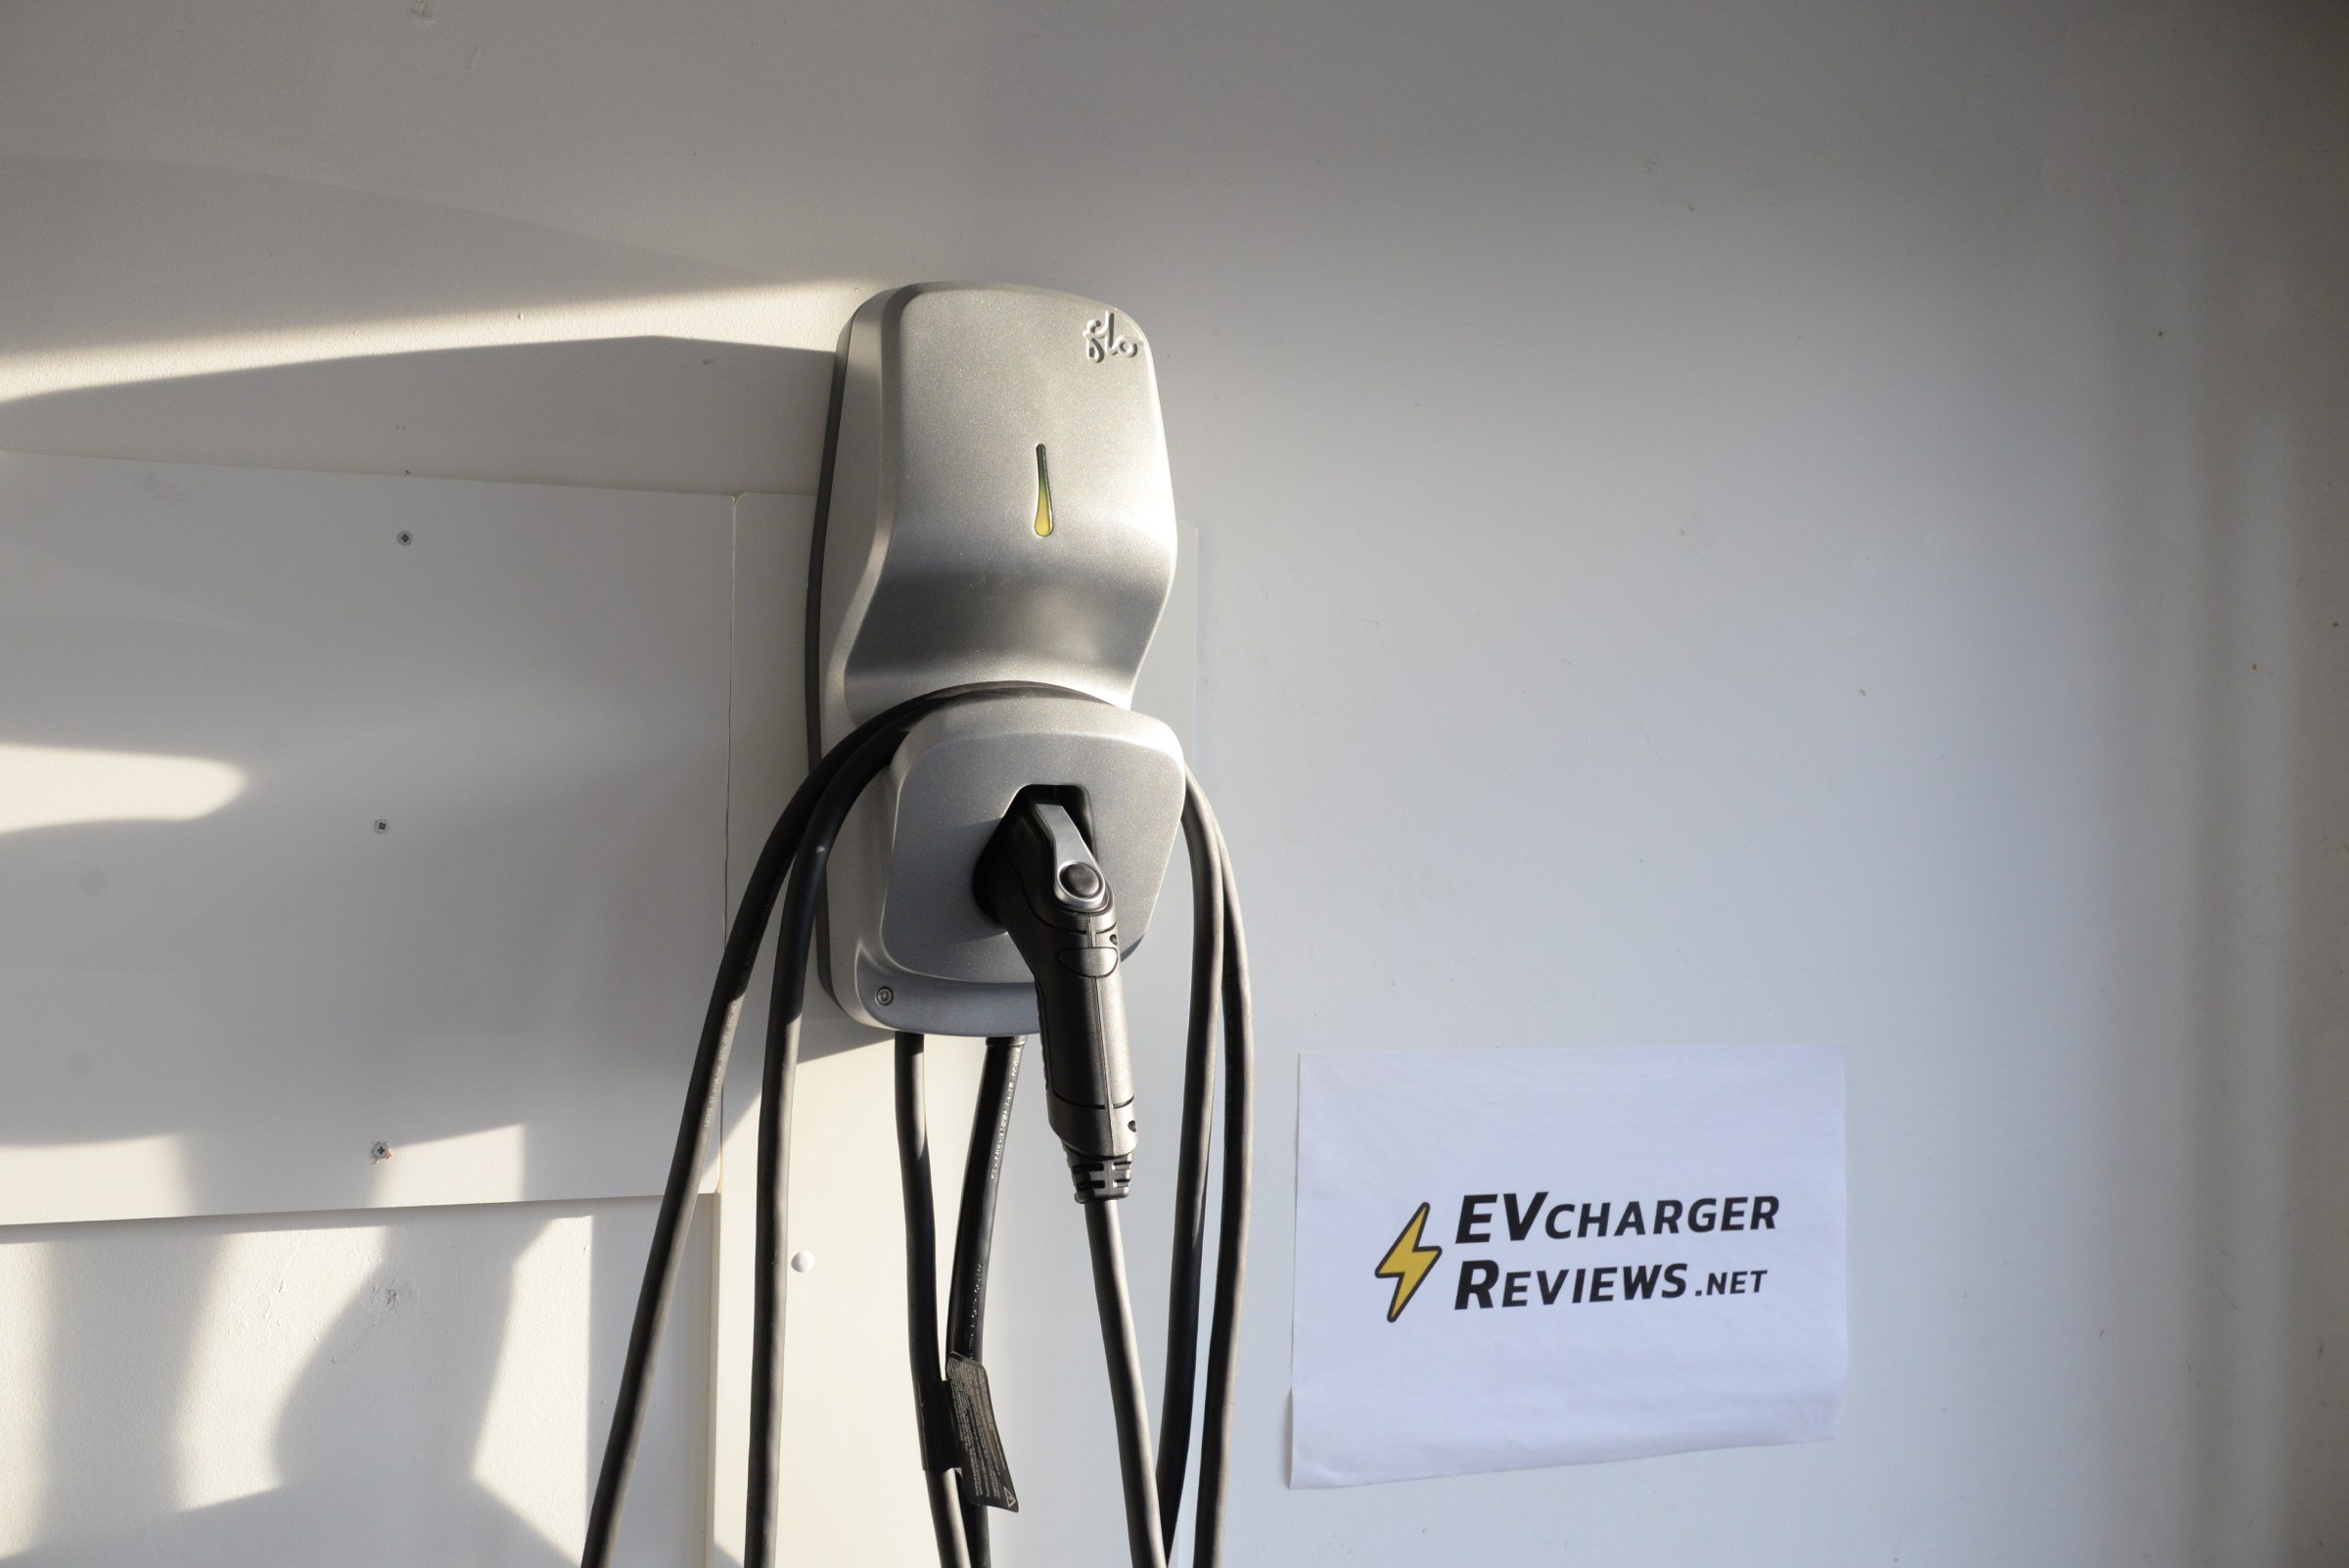 FLO Home X5 EV Charger – Full Review